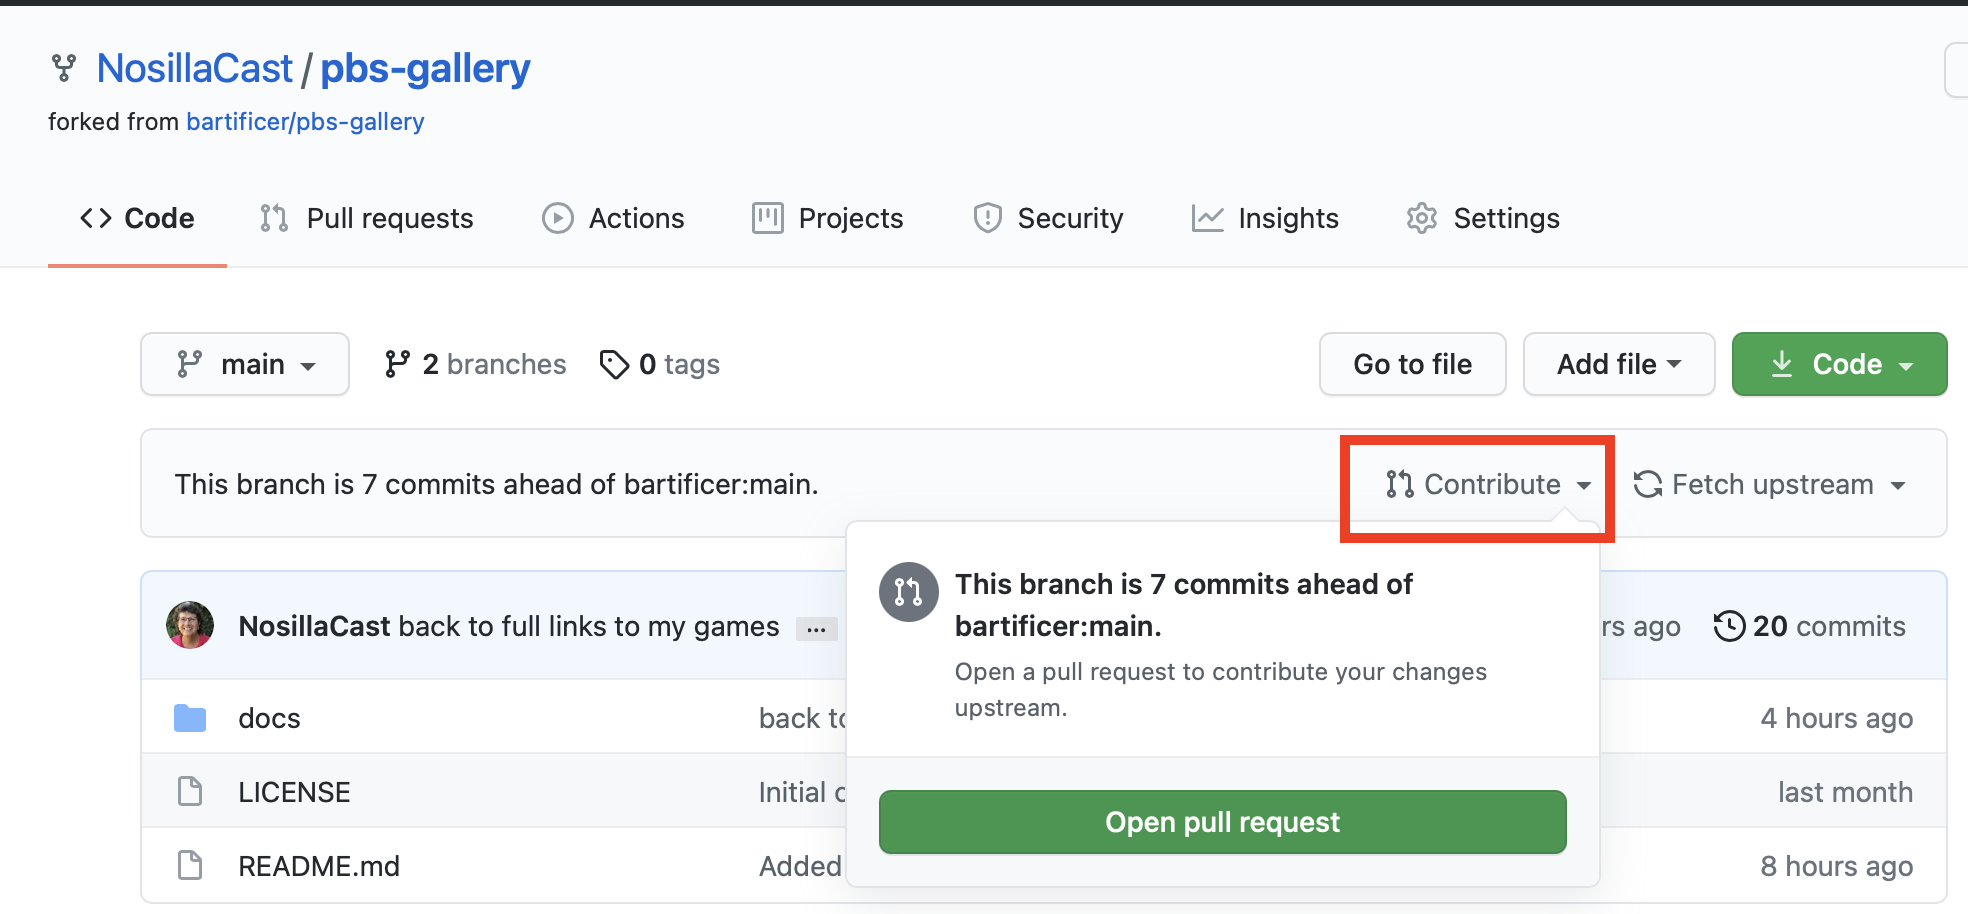 A screenshot showing the 'Contribute' button Allison clicked to reveal the 'Open pull request' button